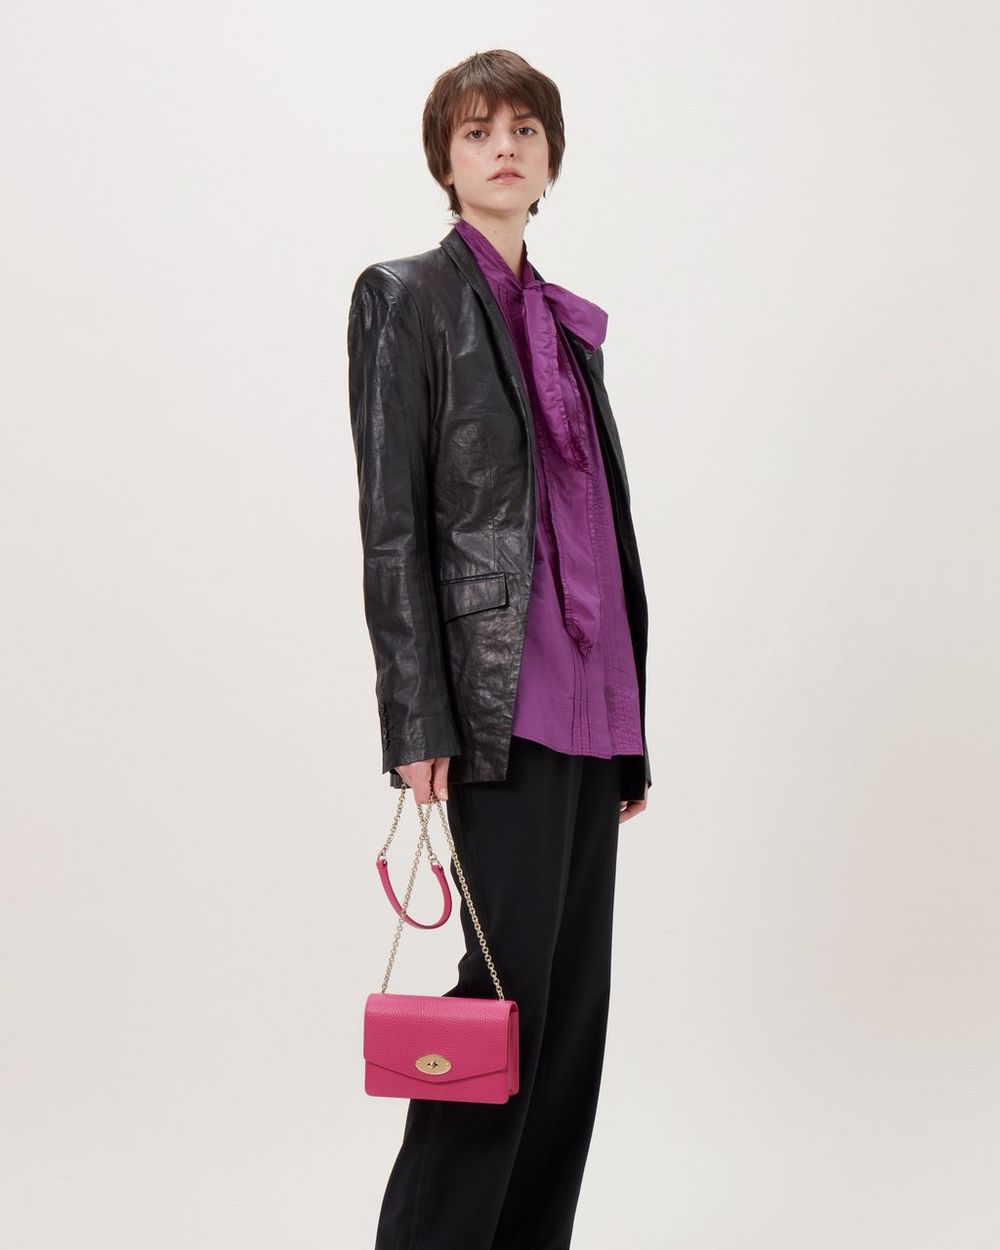 Mulberry Bags in Pink